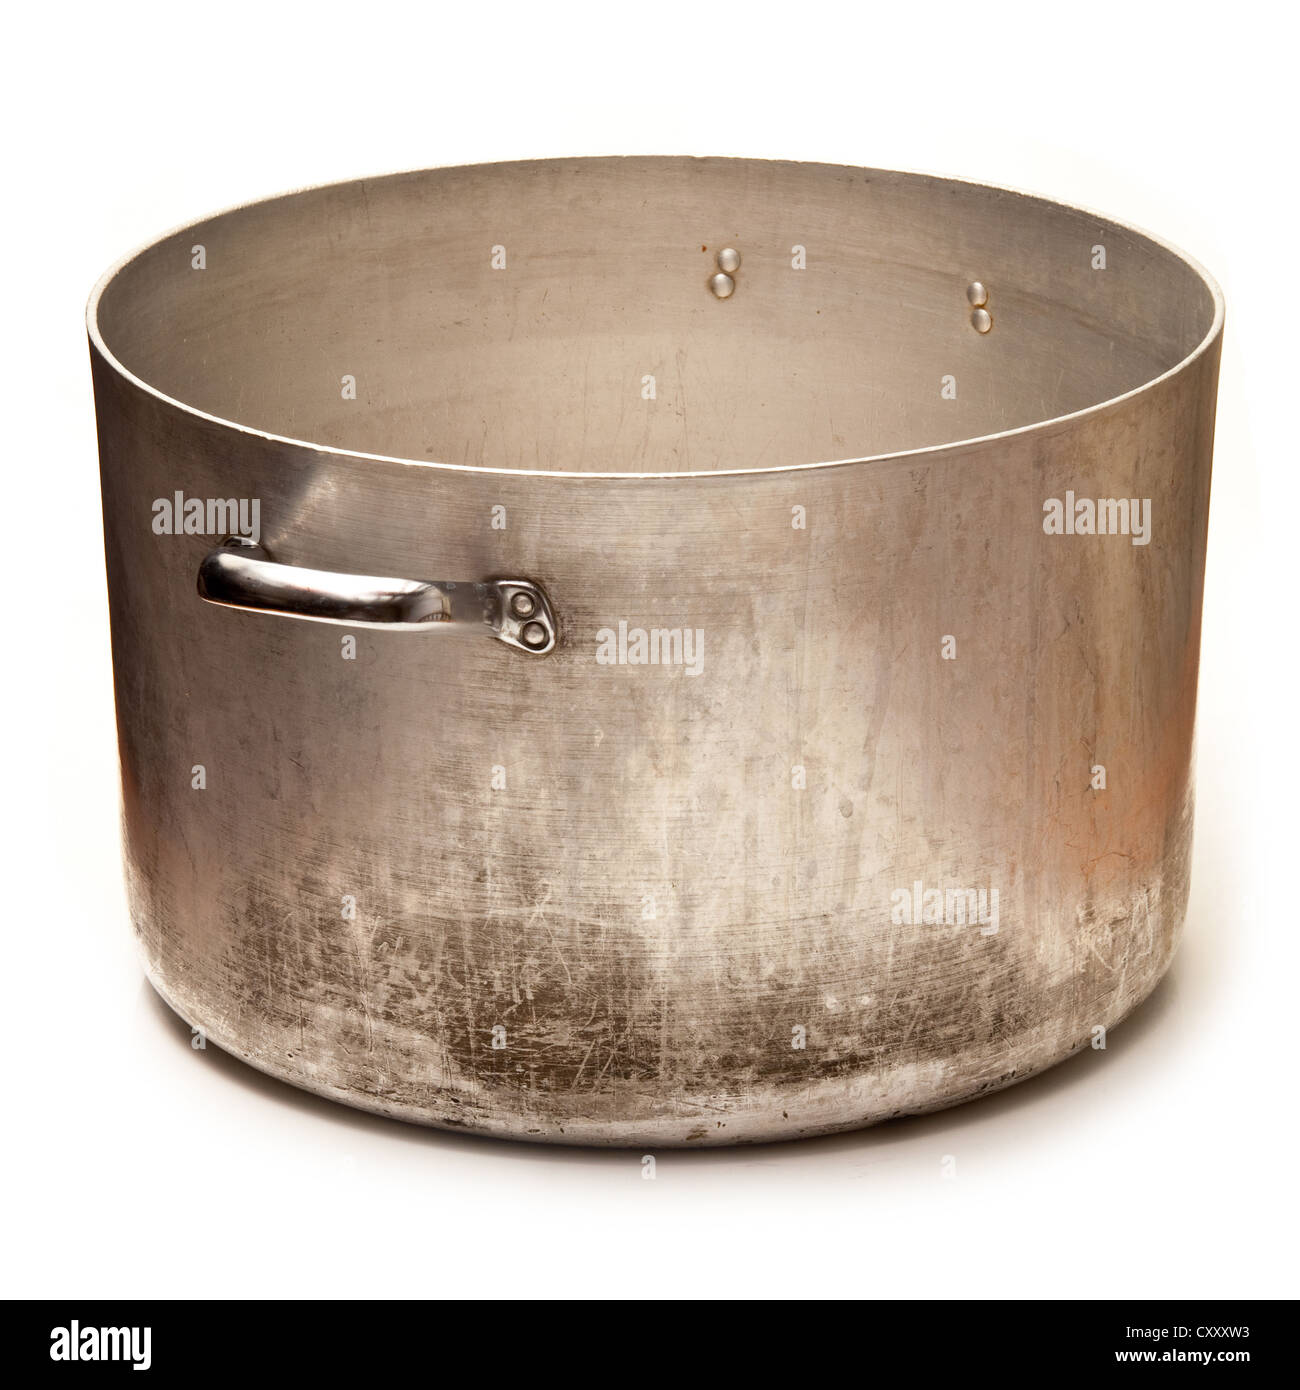 Large metal saucepan cooking pot isolated on a white studio background. Stock Photo